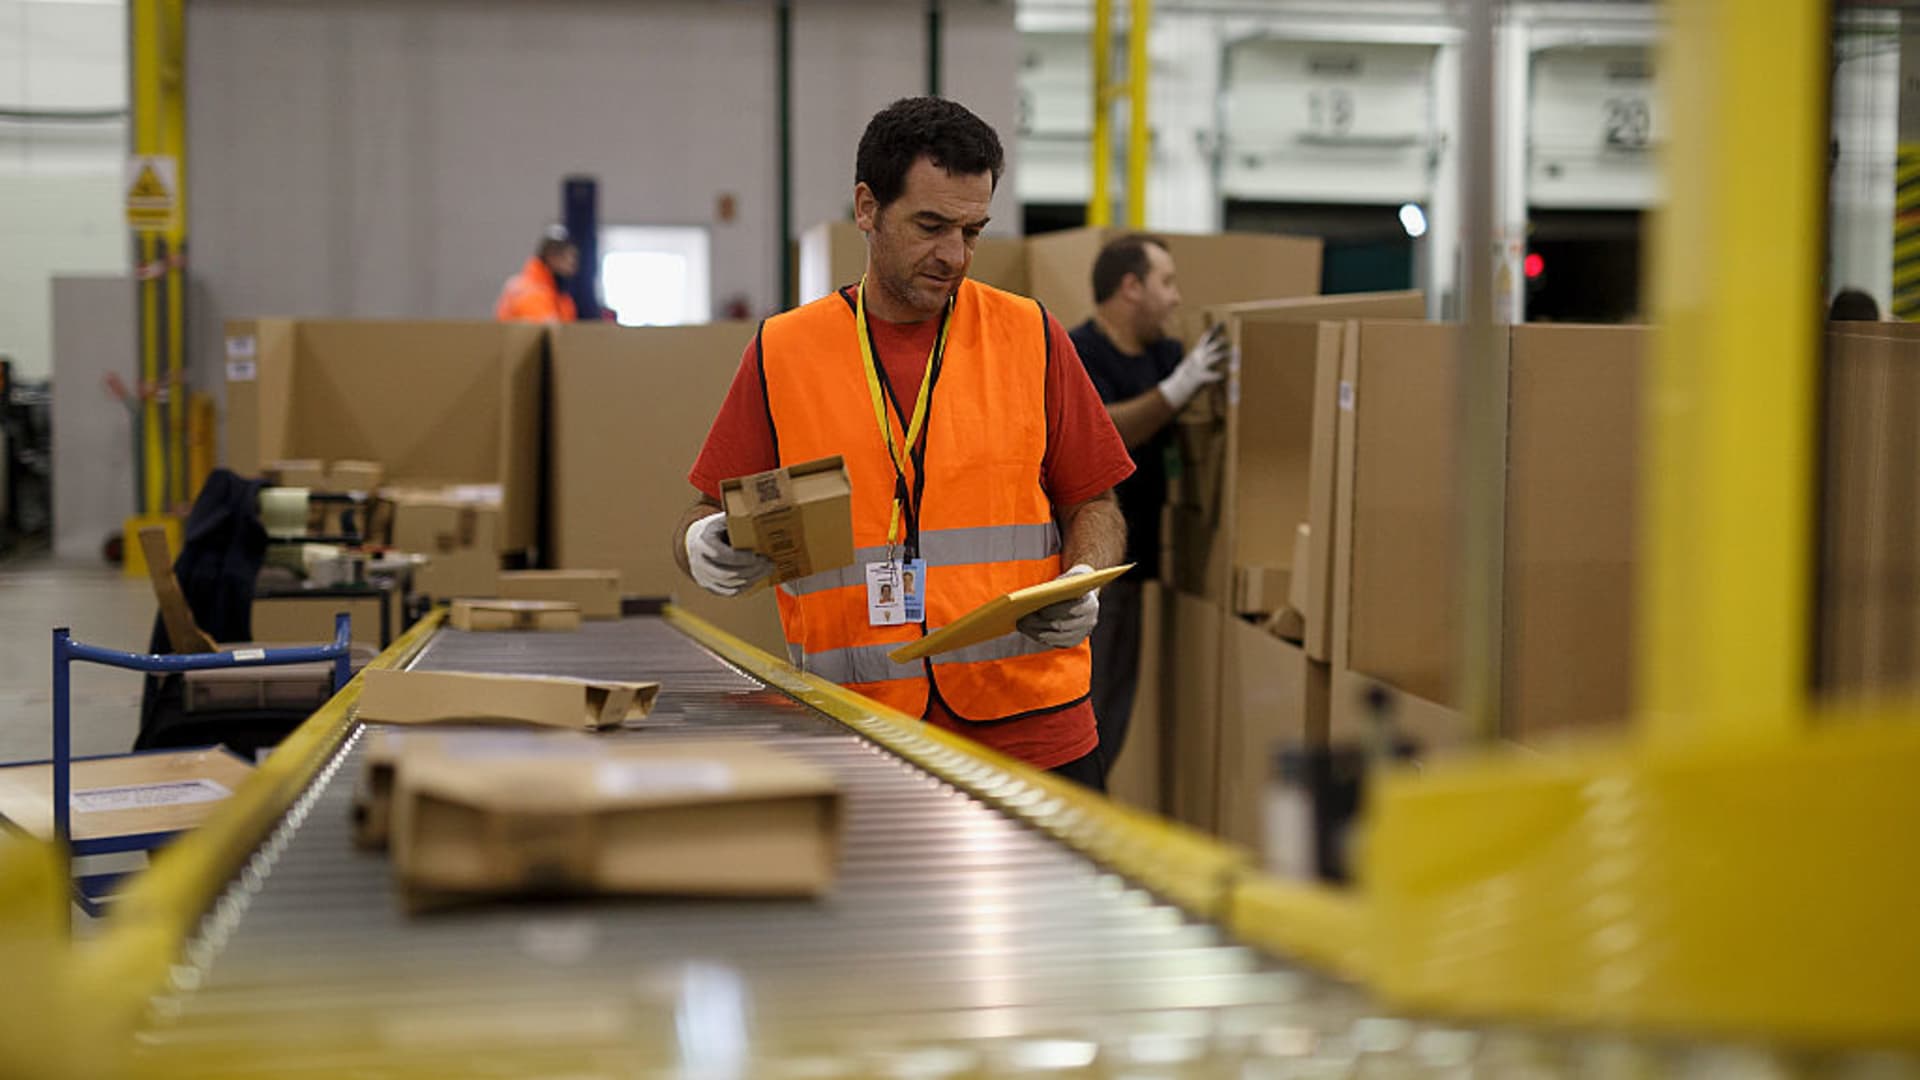 Amazon workers seriously hurt at twice rate of other warehouses